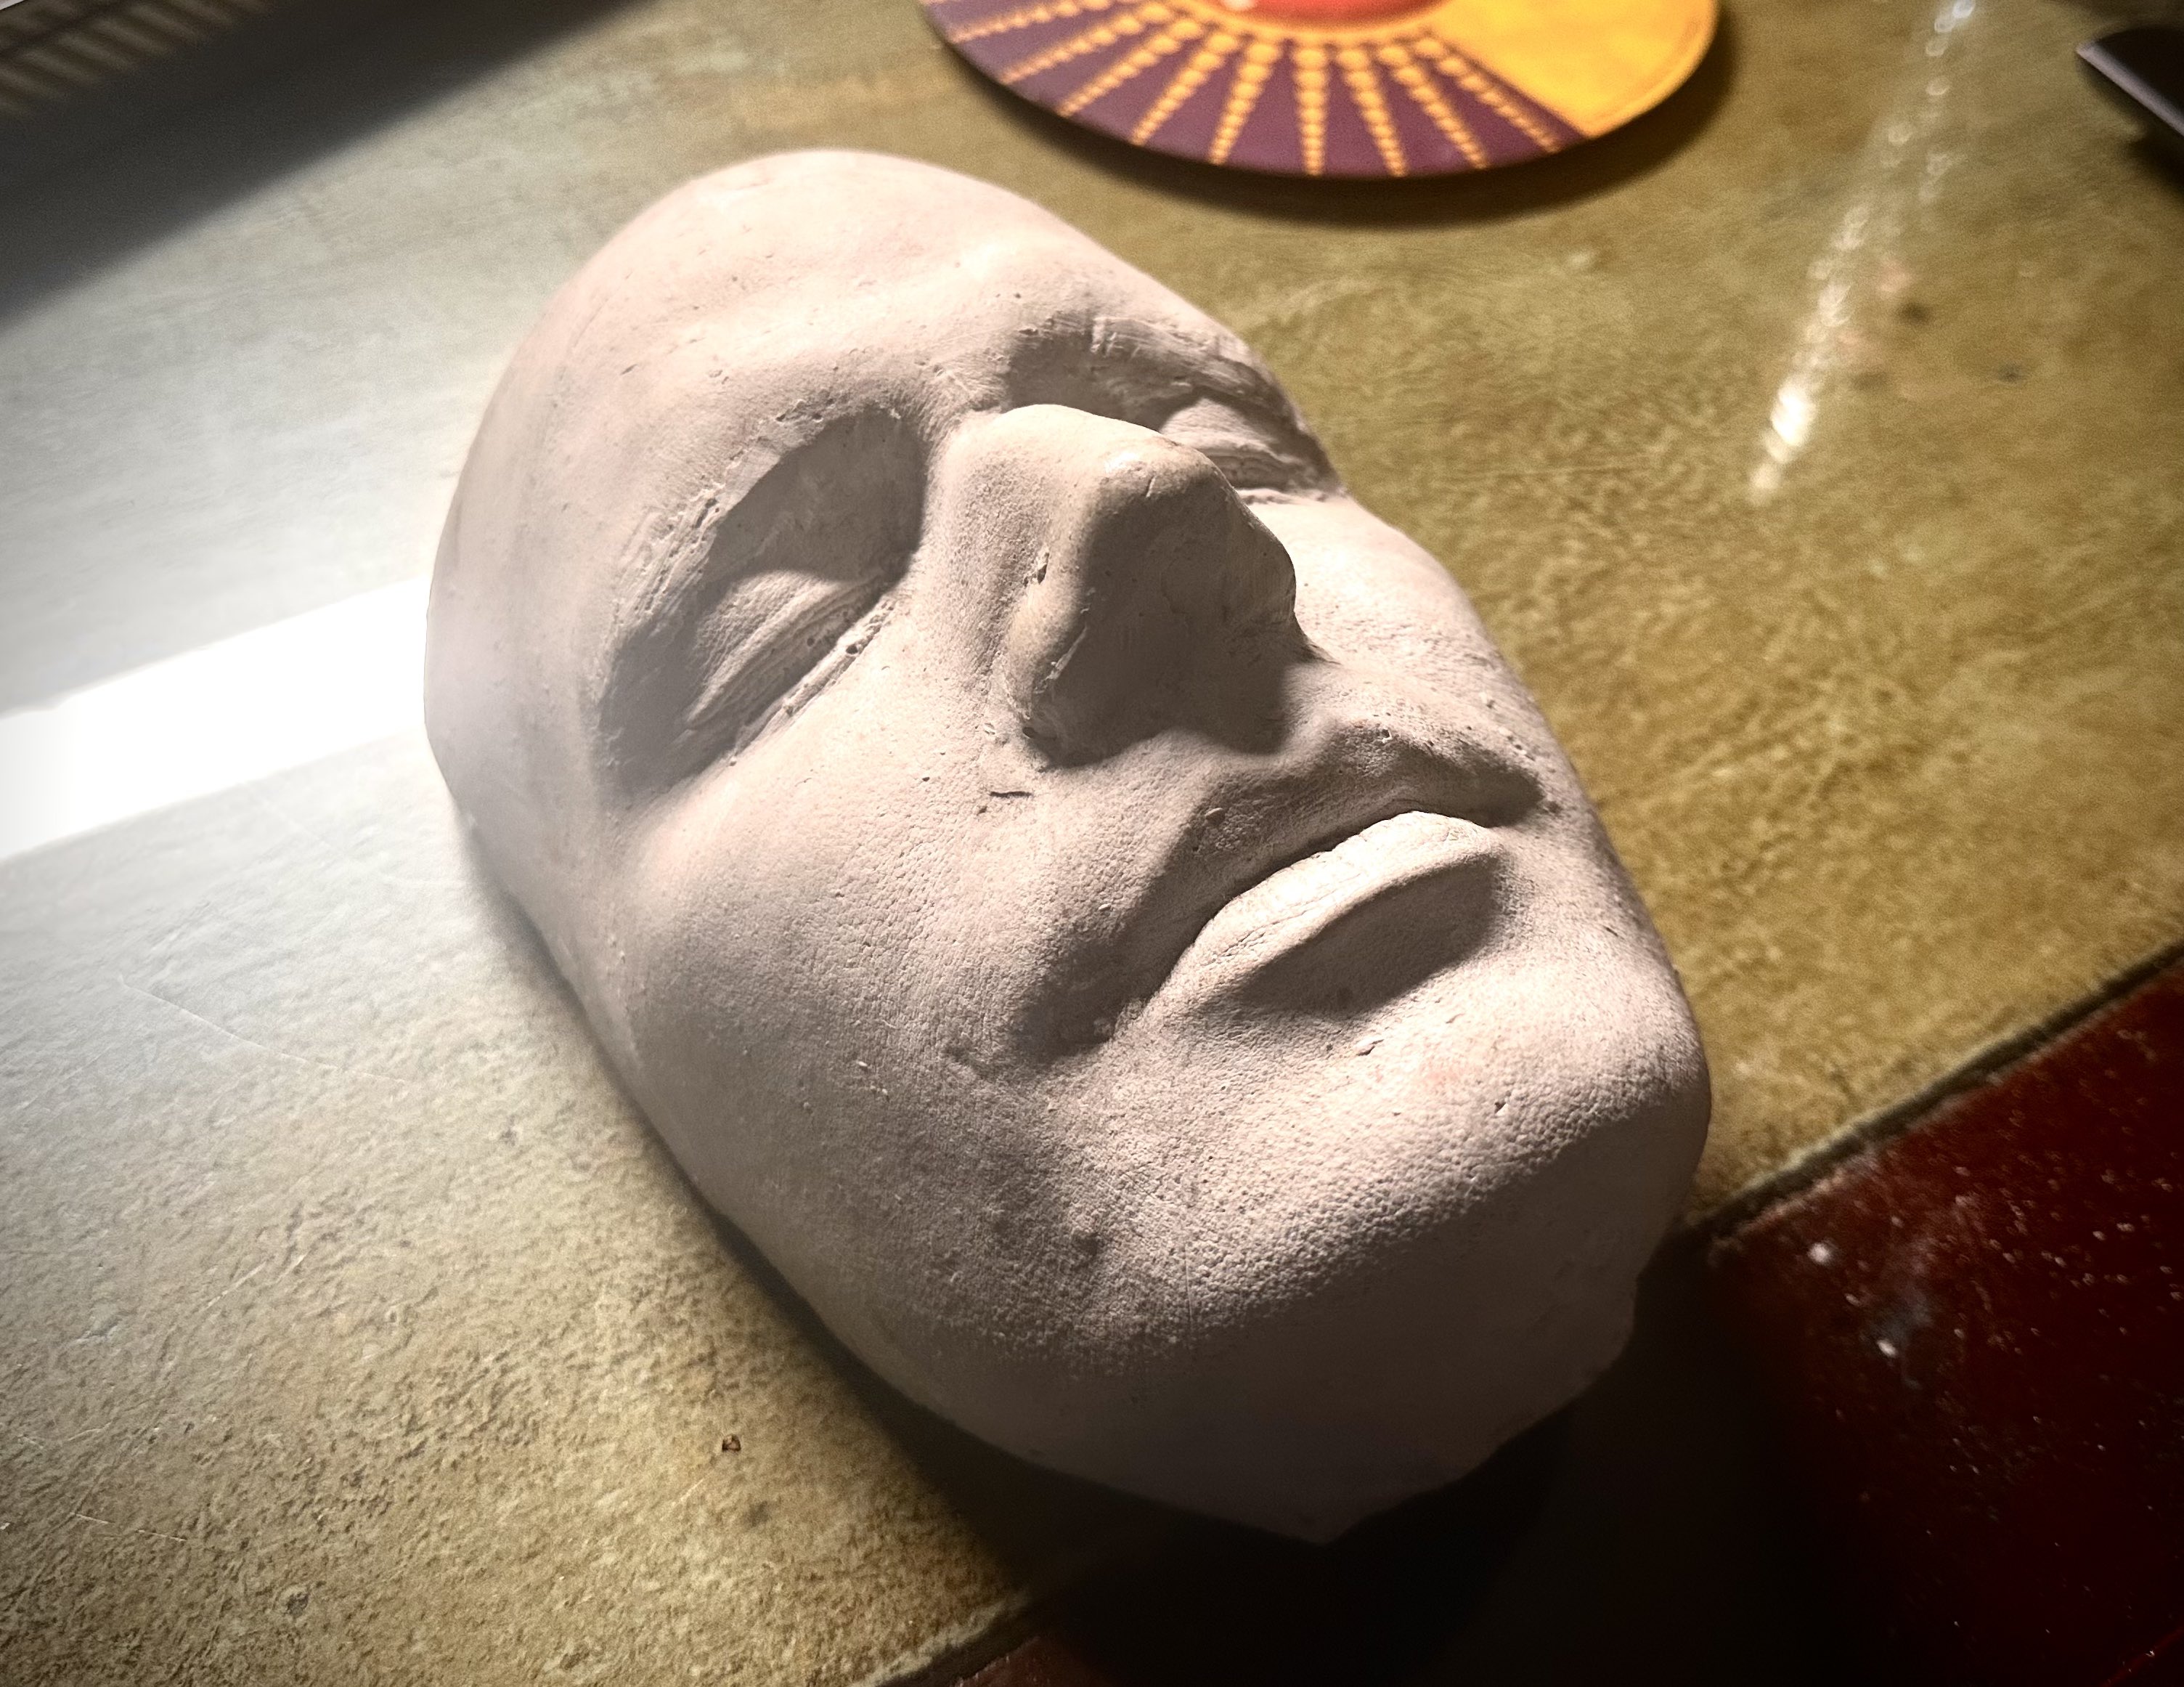 23 year old me forever in plaster.